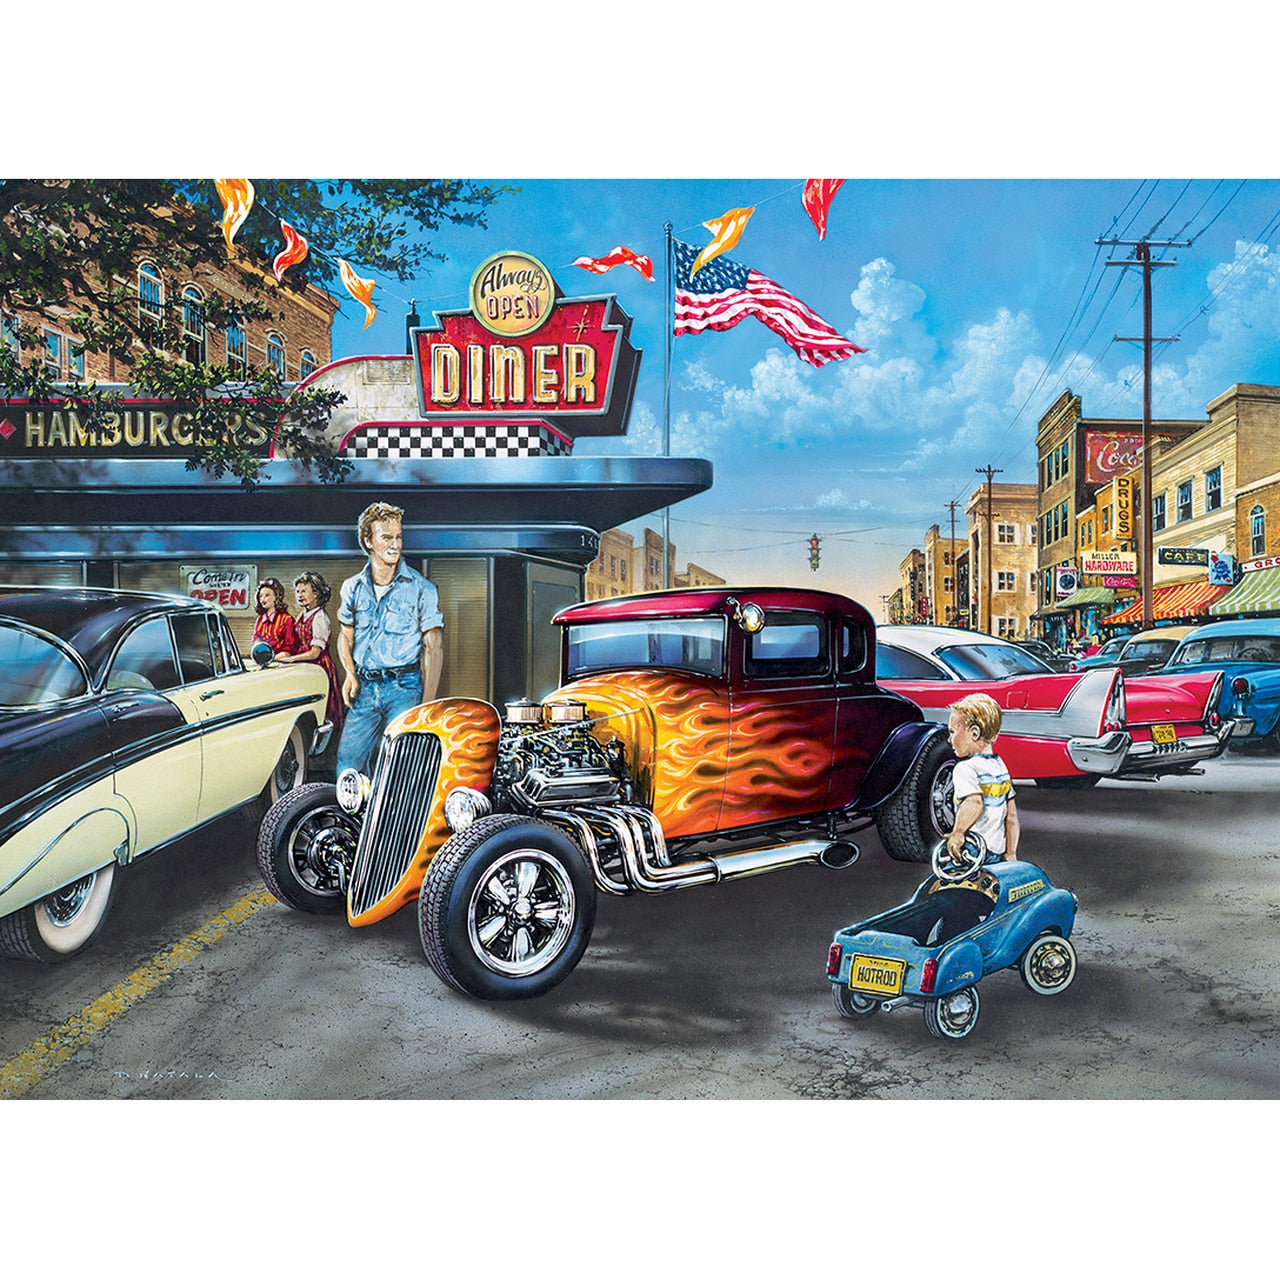 Childhood Dreams - Hot Rods and Milkshakes 1000 Piece Puzzle    